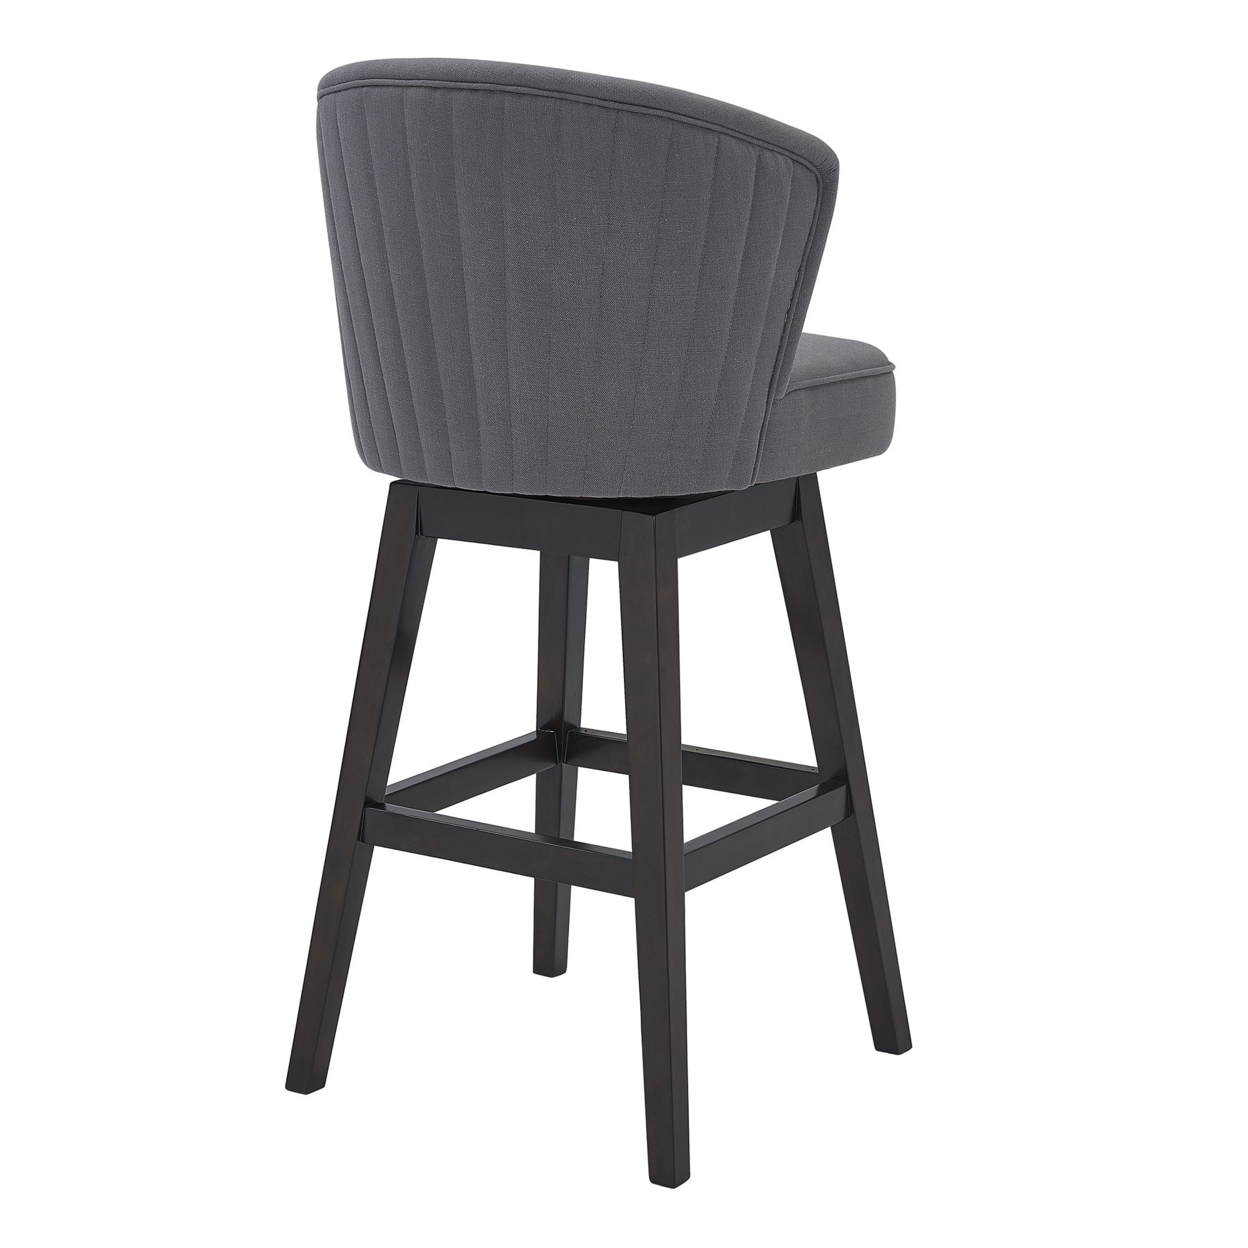 26 Inches Padded Swivel Counter Stool With Curved Backrest, Gray- Saltoro Sherpi